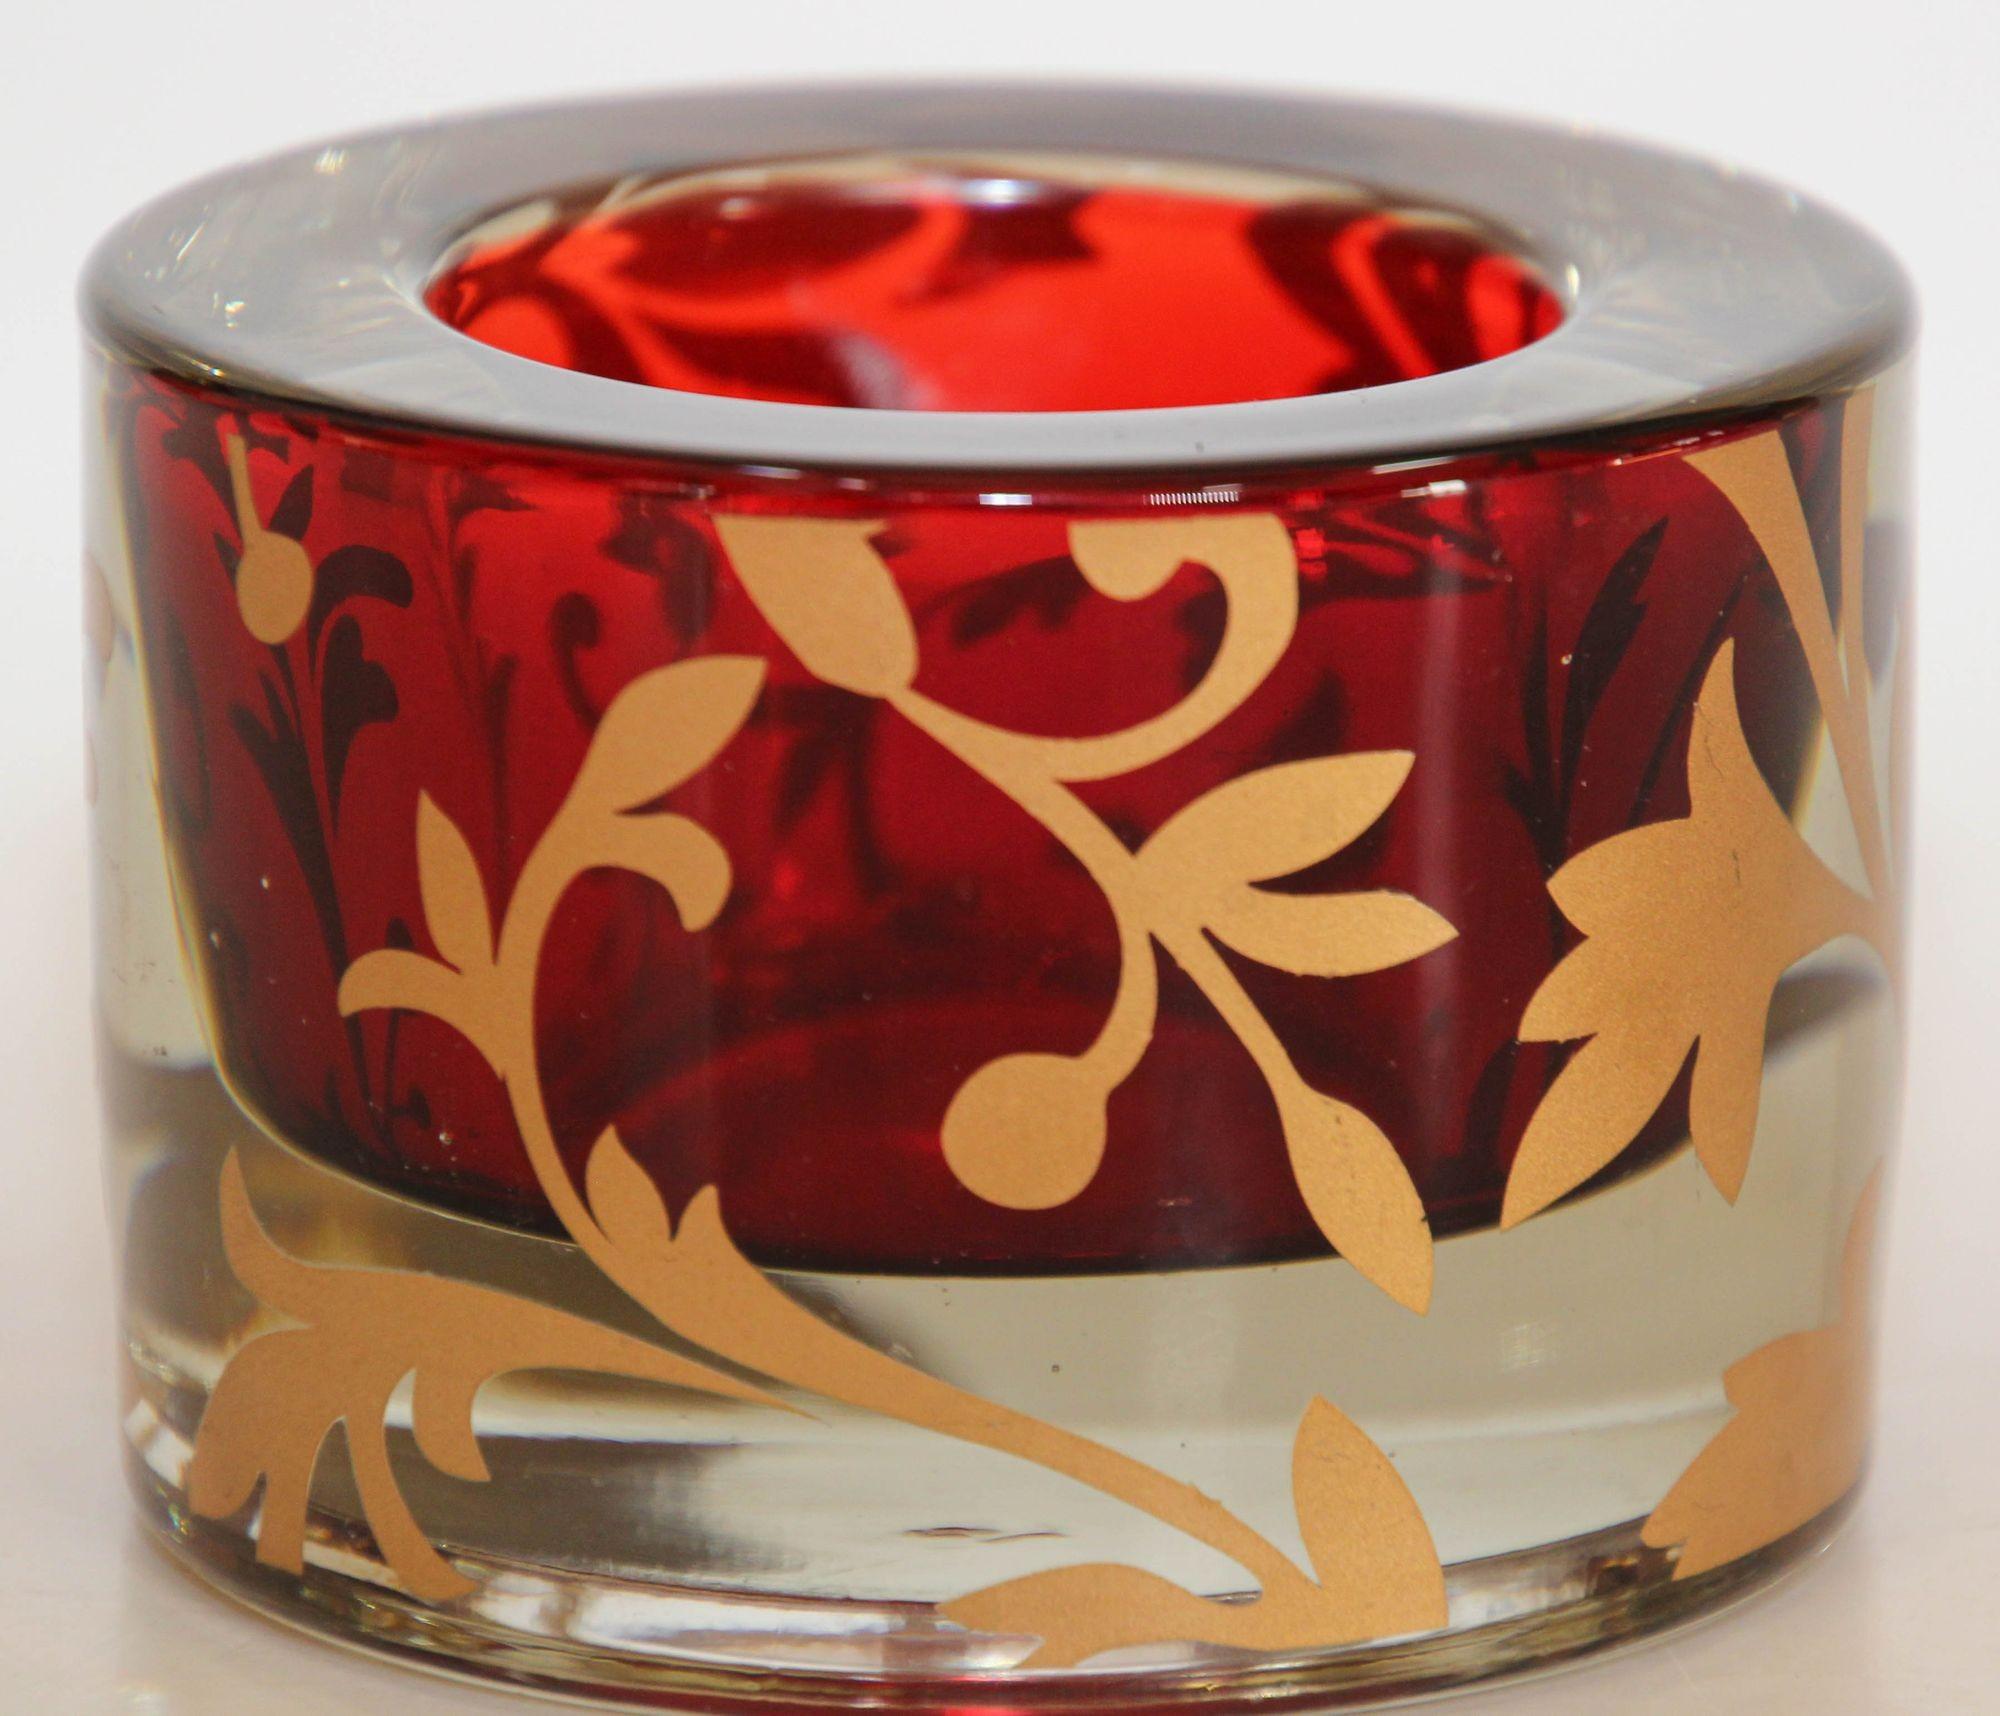 Luxe Moroccan red glass votive holder with 22k gold floral design.
Clear transparent glass with red interior and gold leaf Moorish design.
Heavy Moroccan red and gold glass votive holder luxurious look, use it as a paperweight, small ashtray or